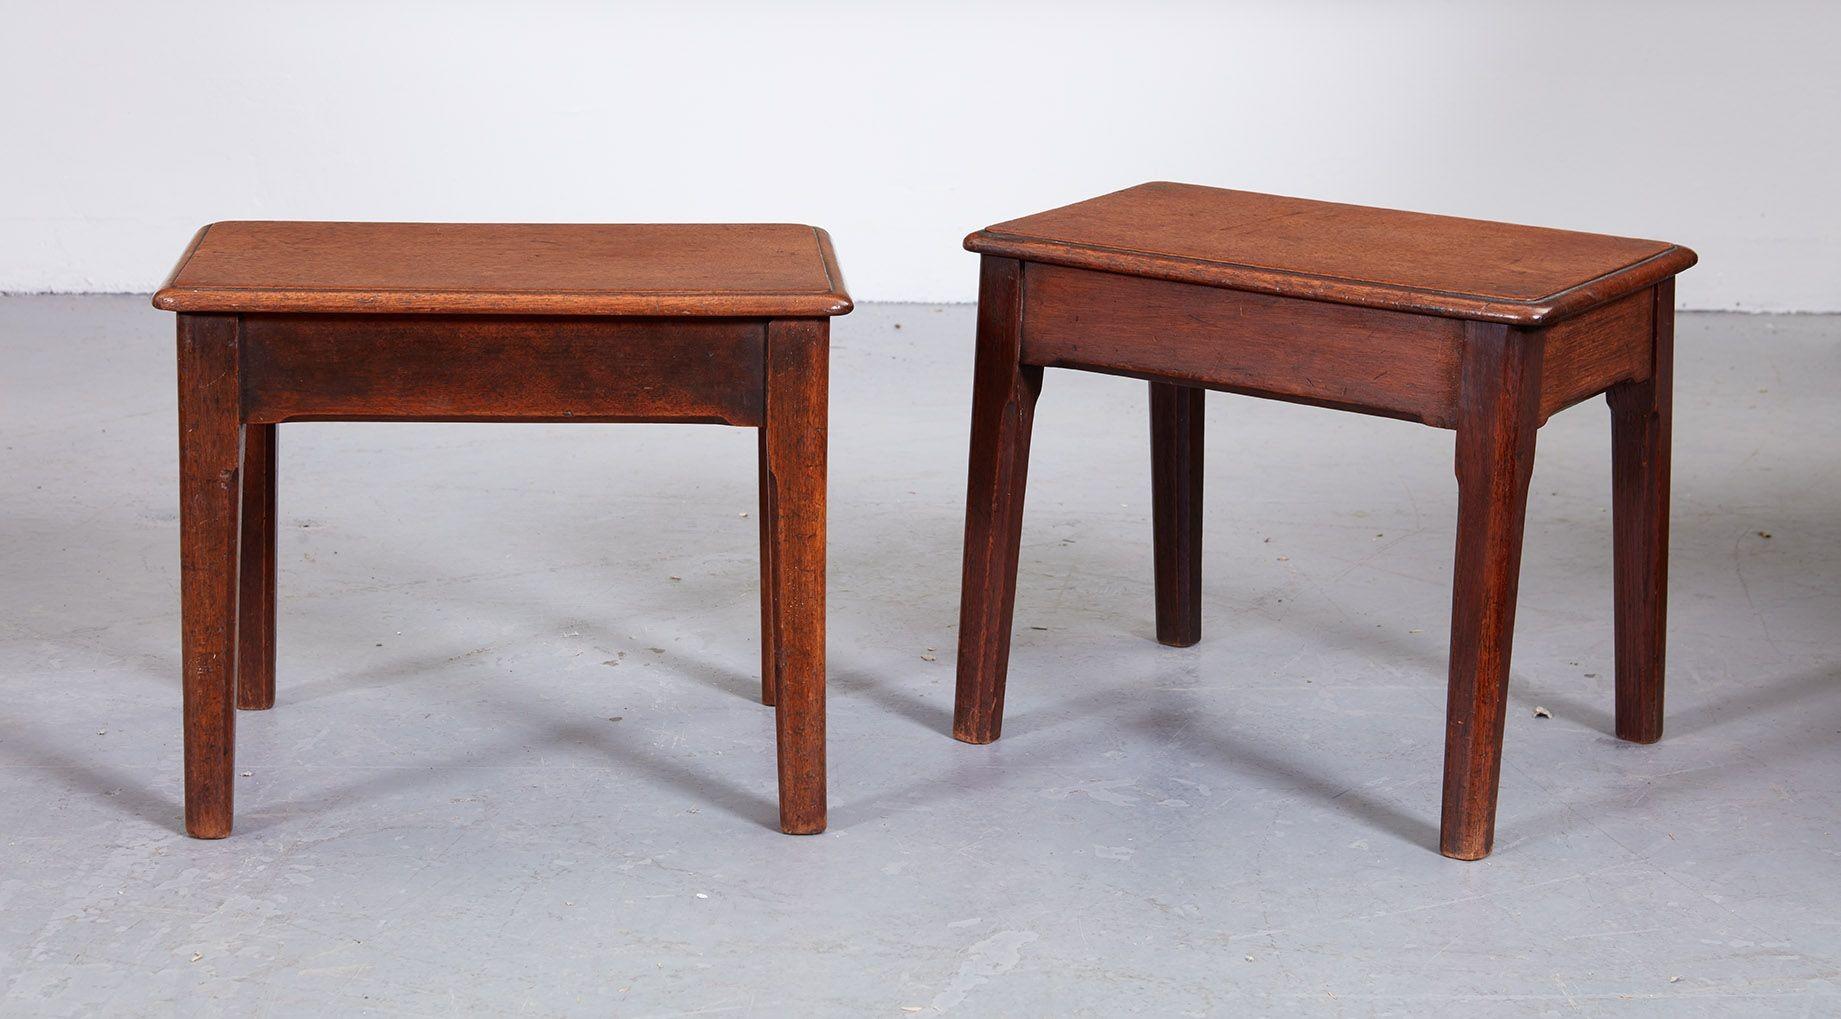 Fine pair of Georgian mahogany foot stools of diminutive scale, the thumb molded single board tops over splayed bases, the aprons with pencil chamfered edge, the legs of tapered form, the whole with good untouched surfaces and patination.